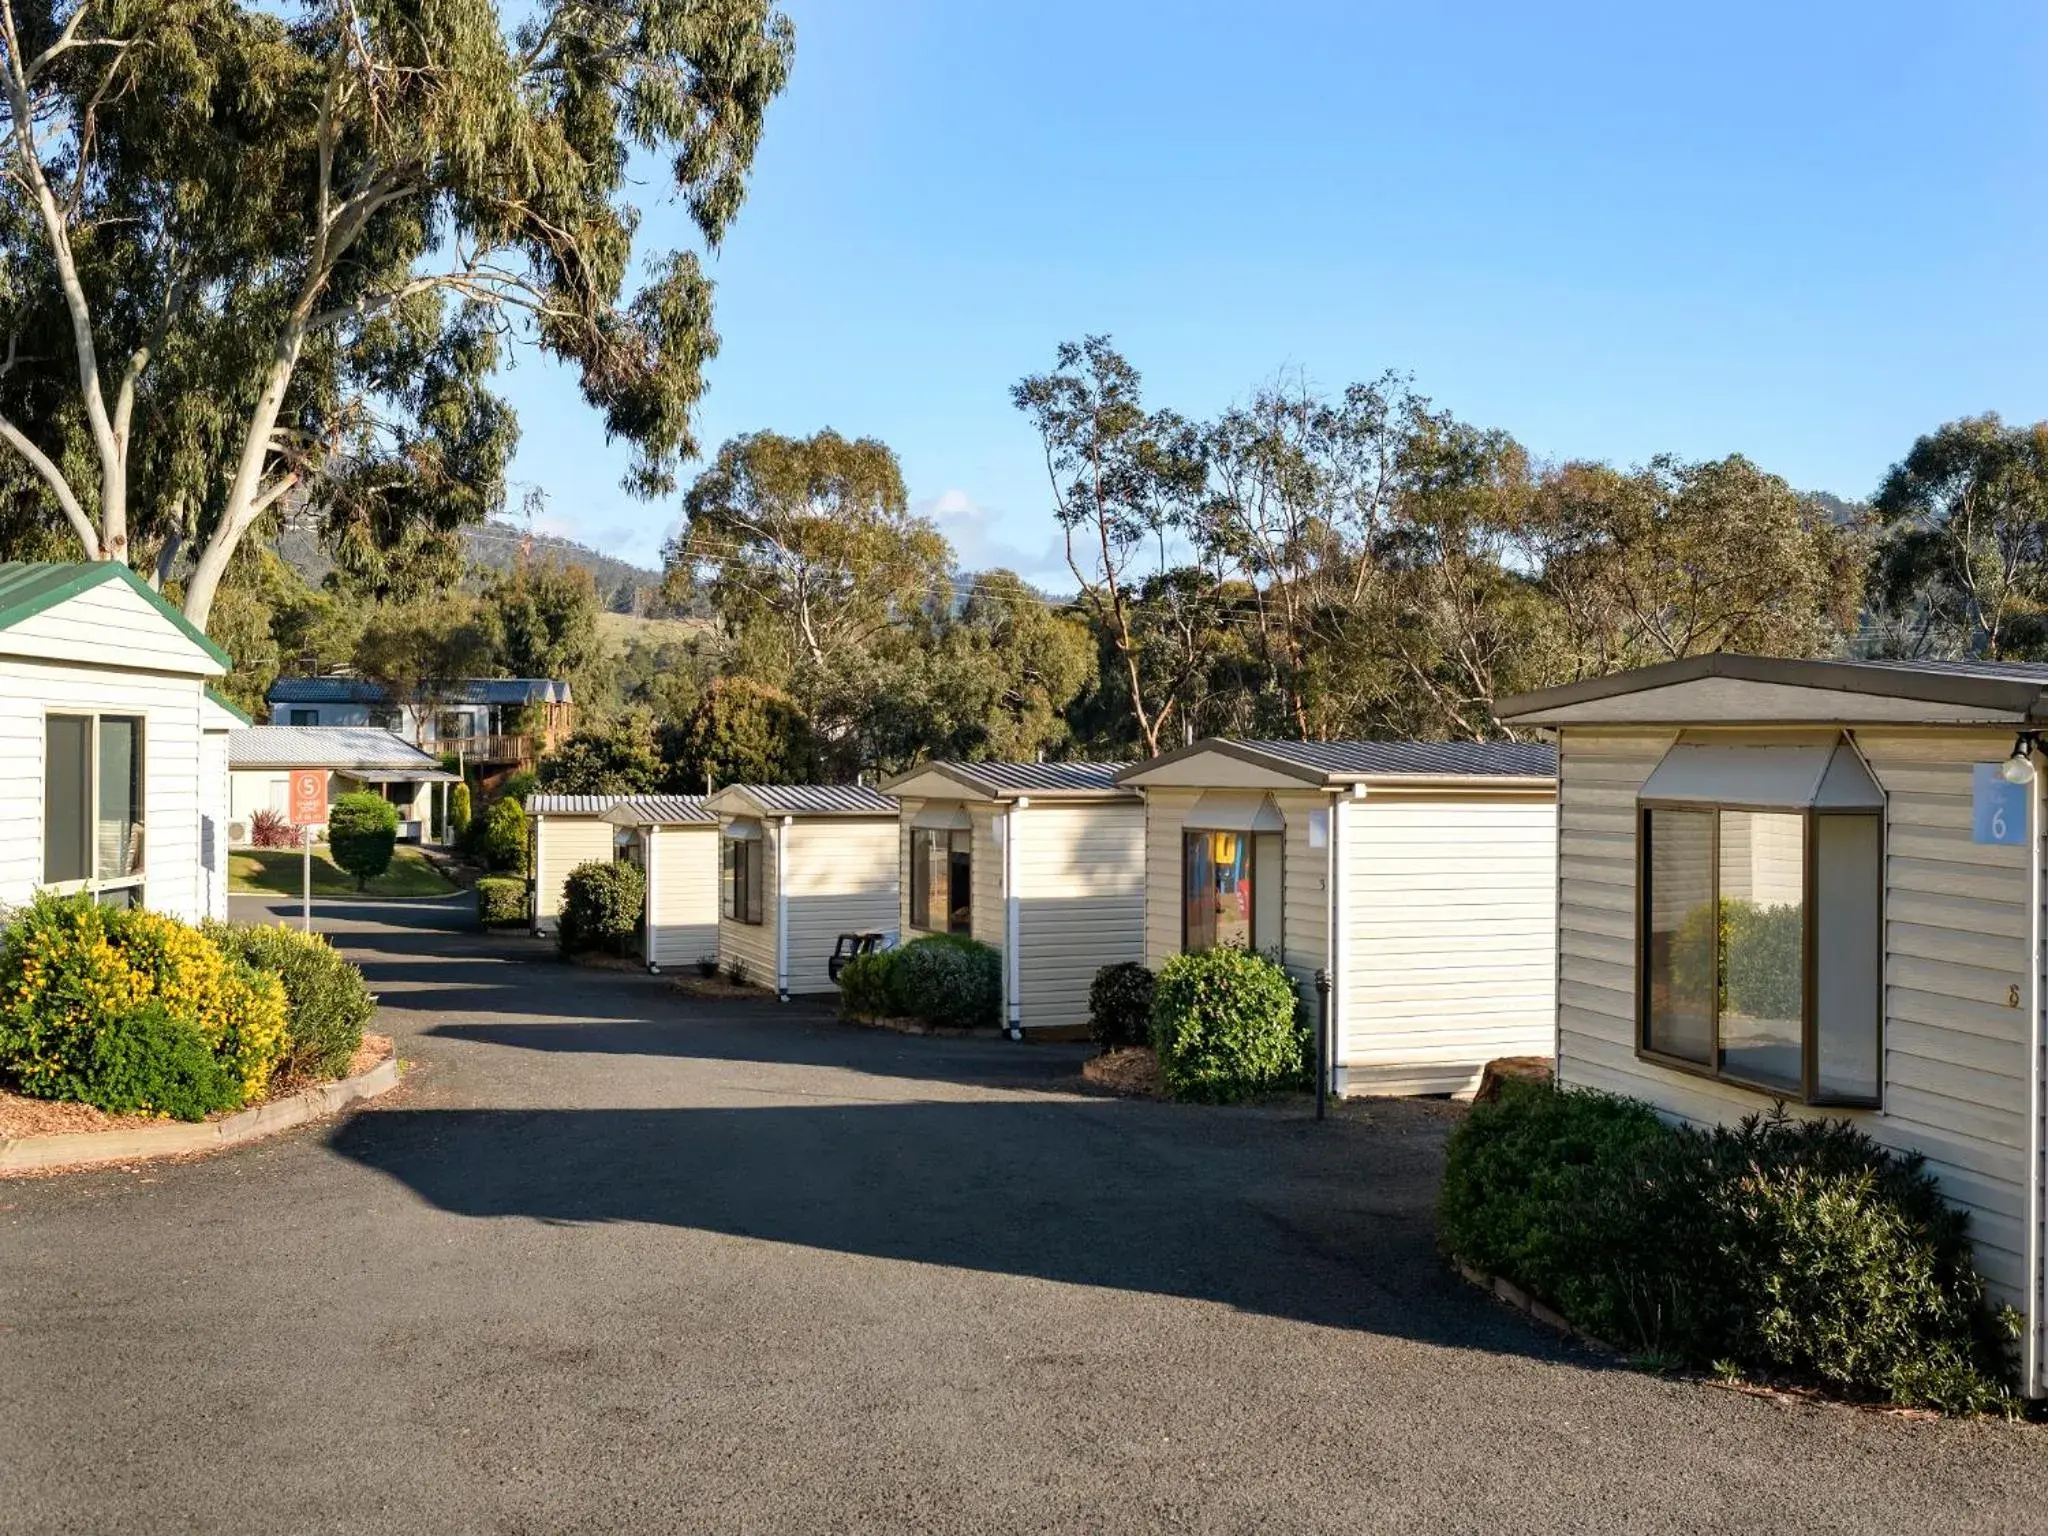 Property Building in Discovery Parks - Hobart